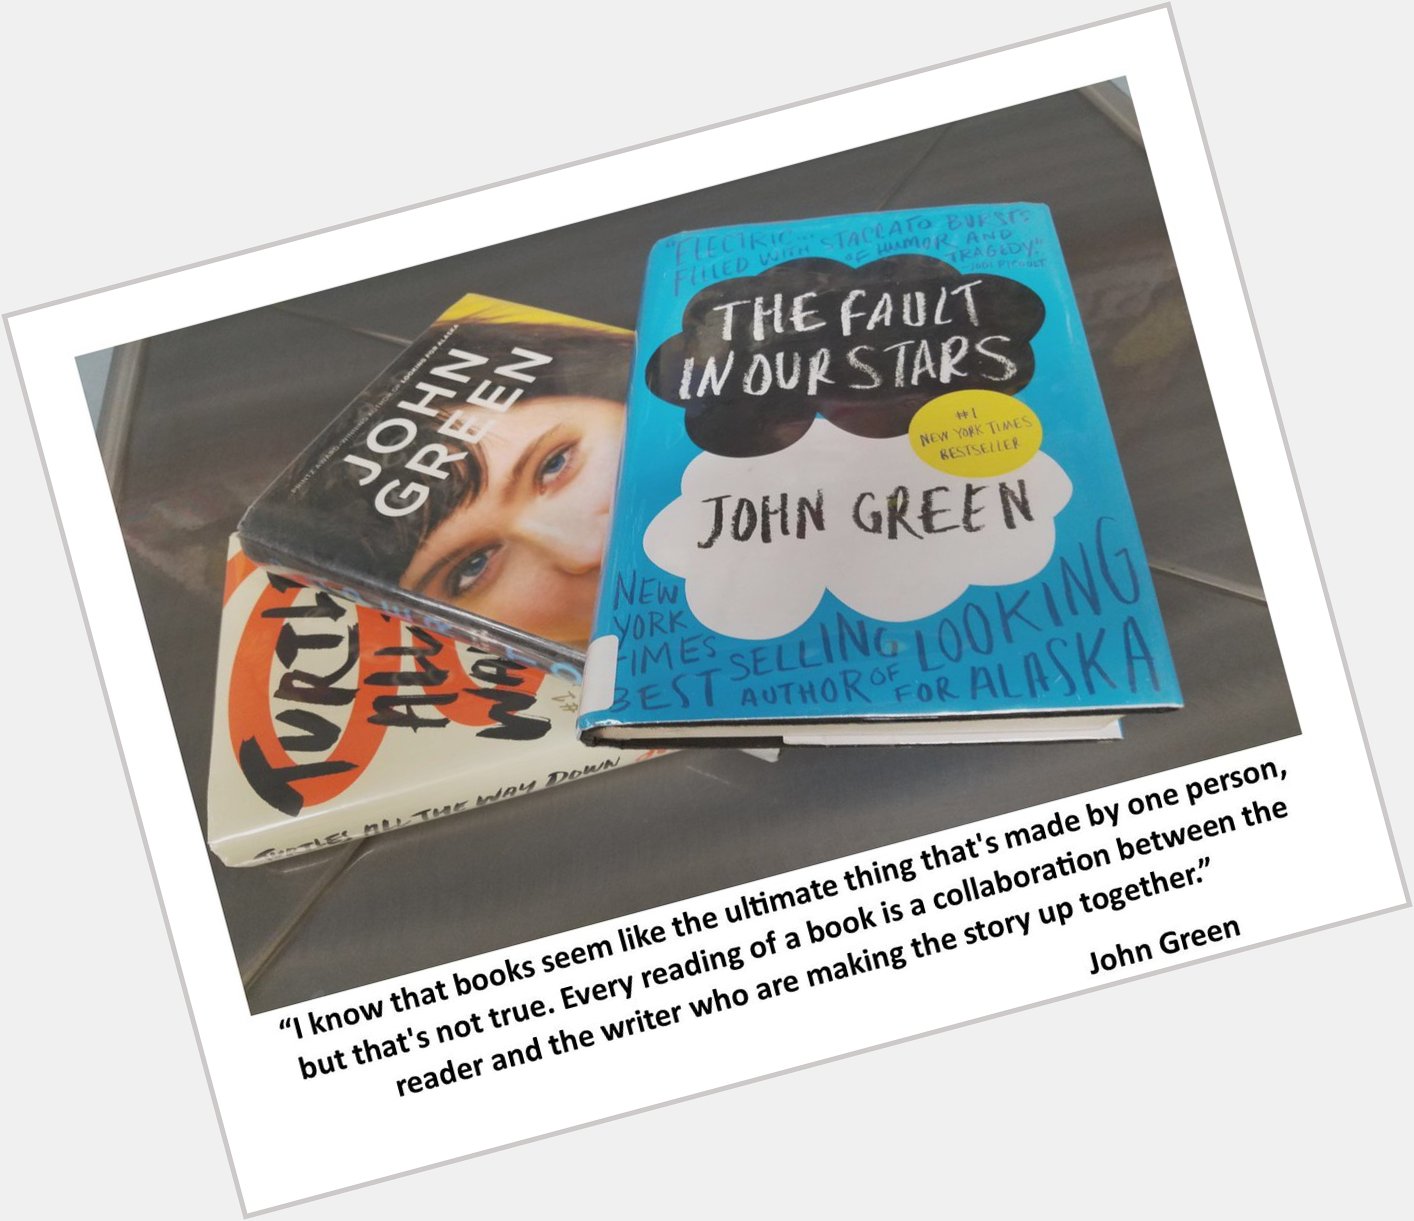 Happy birthday to John Green, author of The Fault in Our Stars!
 